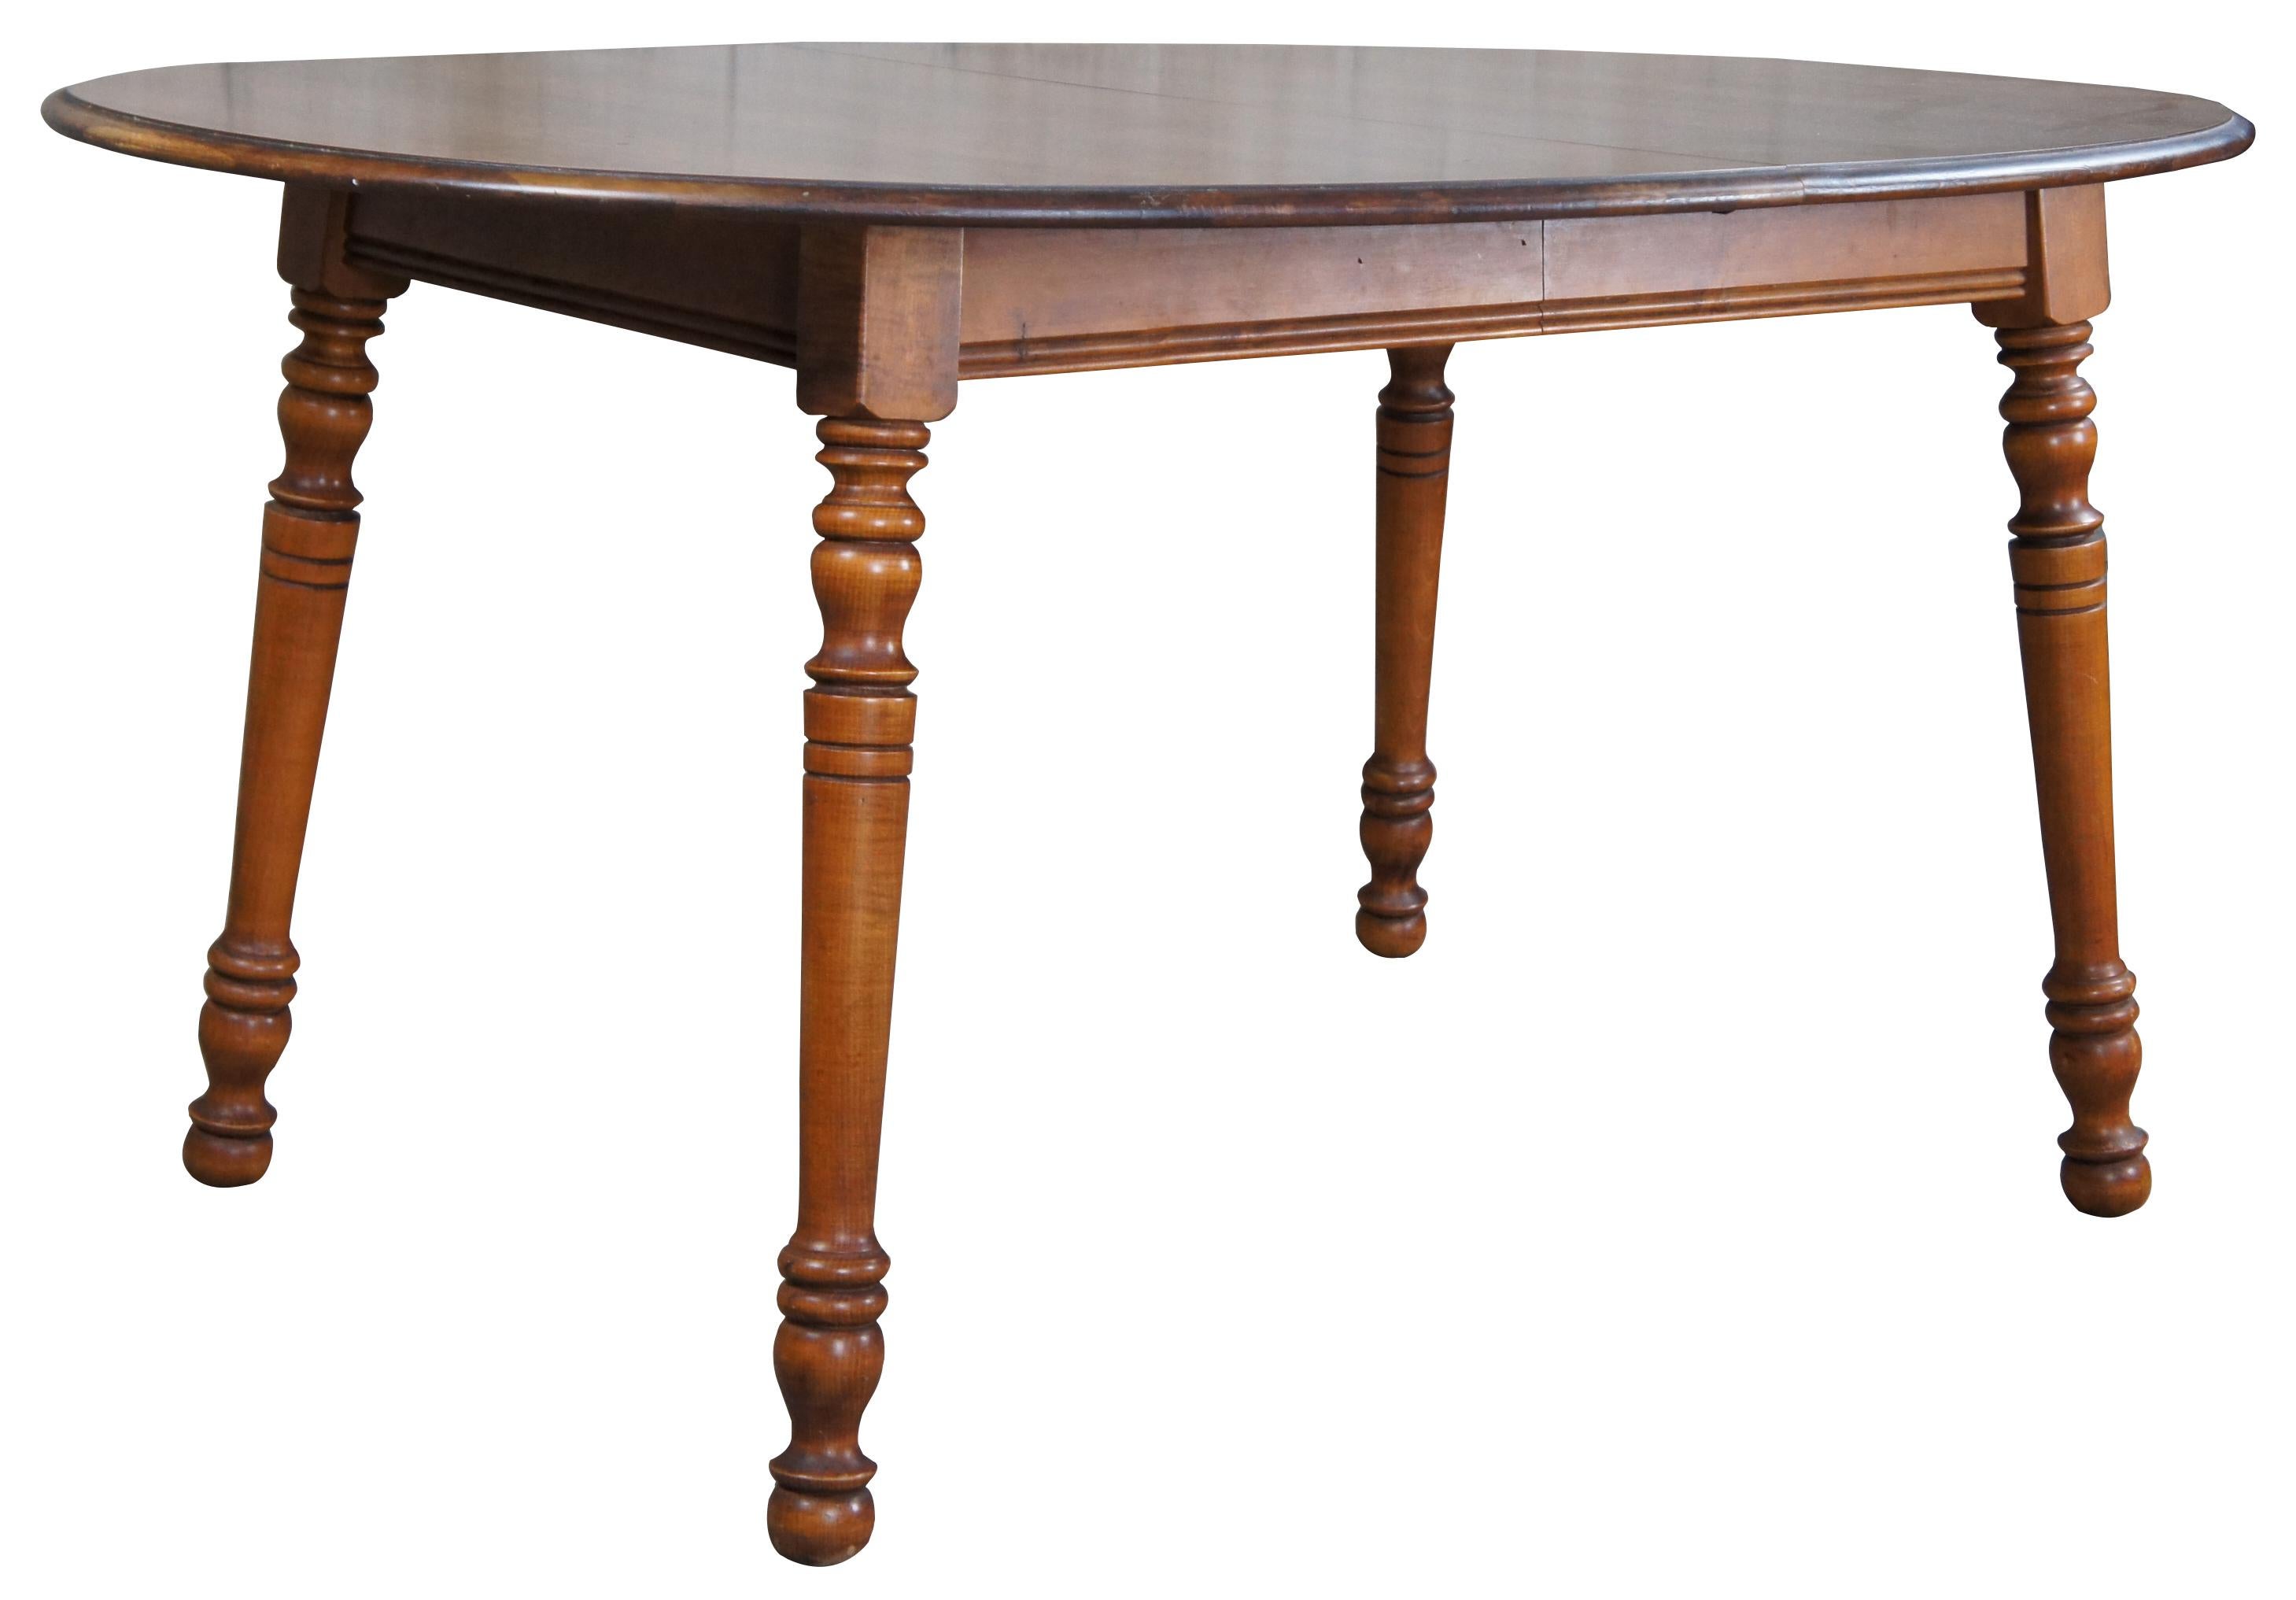 Tell City Chair Company hard rock maple dining table, circa 1960s. Features an oval form with colonial styling and two leaves for extension.

The Tell City Furniture Company, also known as the Tell City Chair company, was one of the most